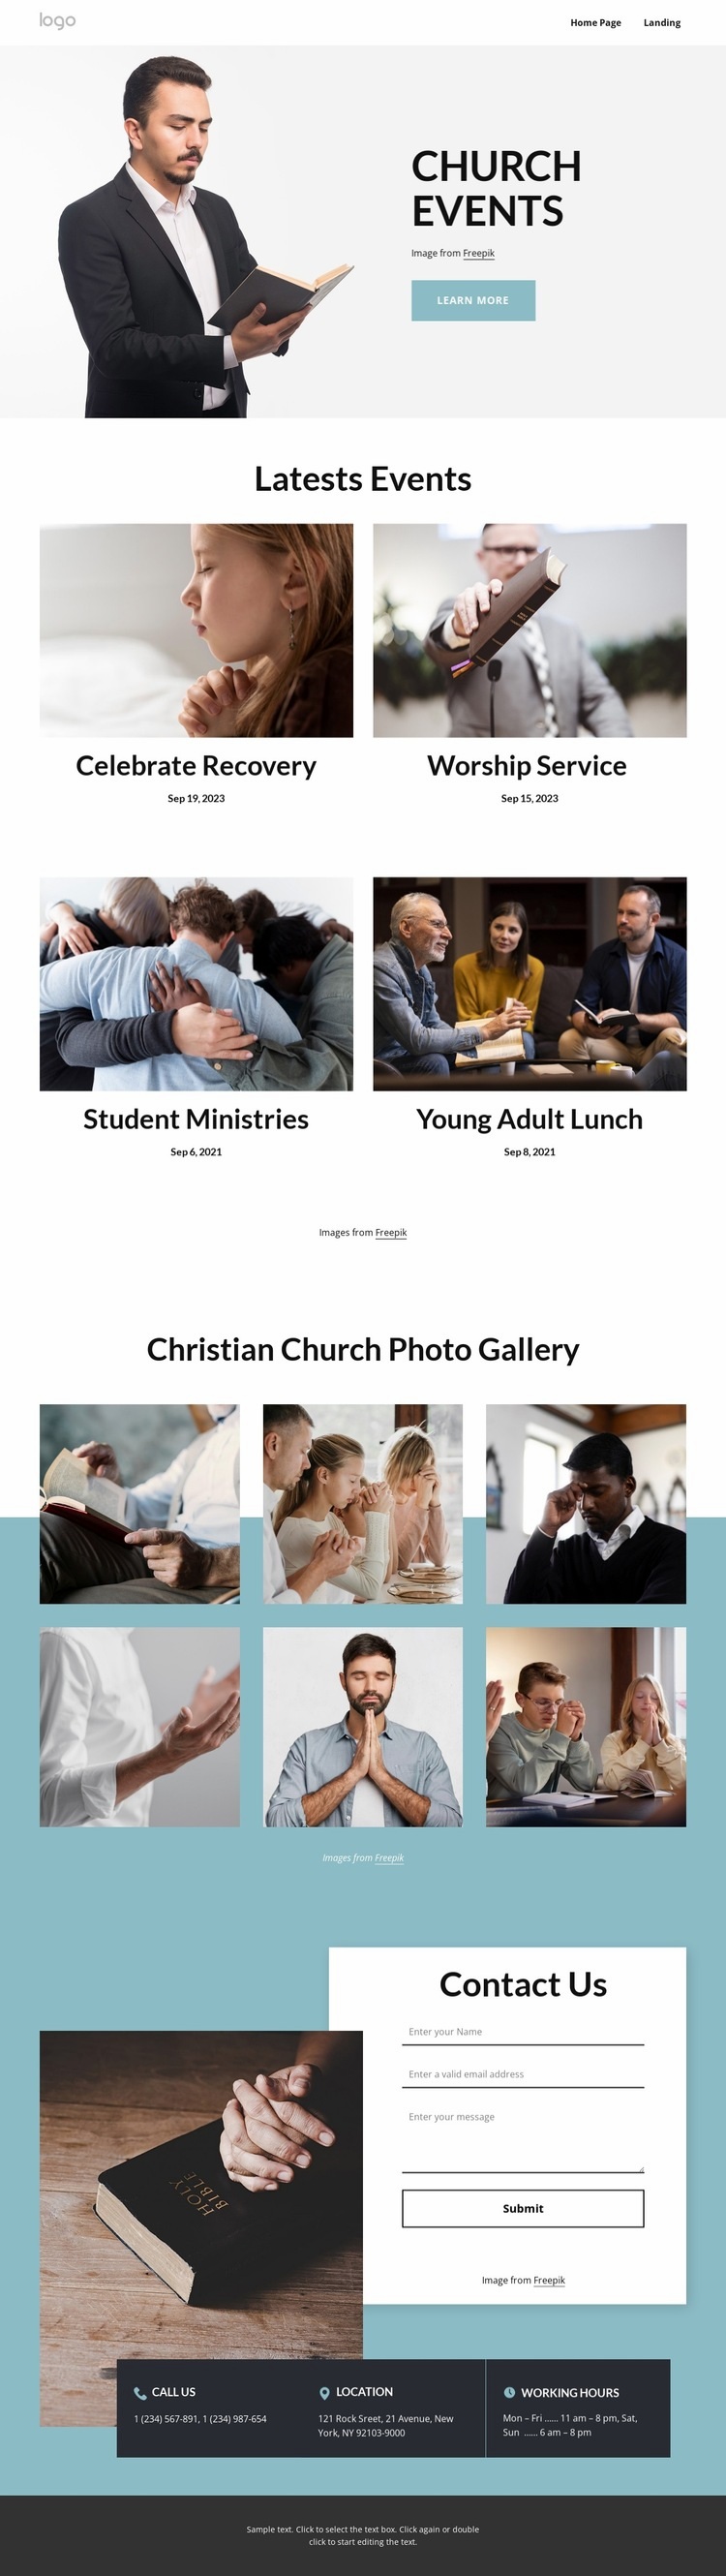 Church events Homepage Design